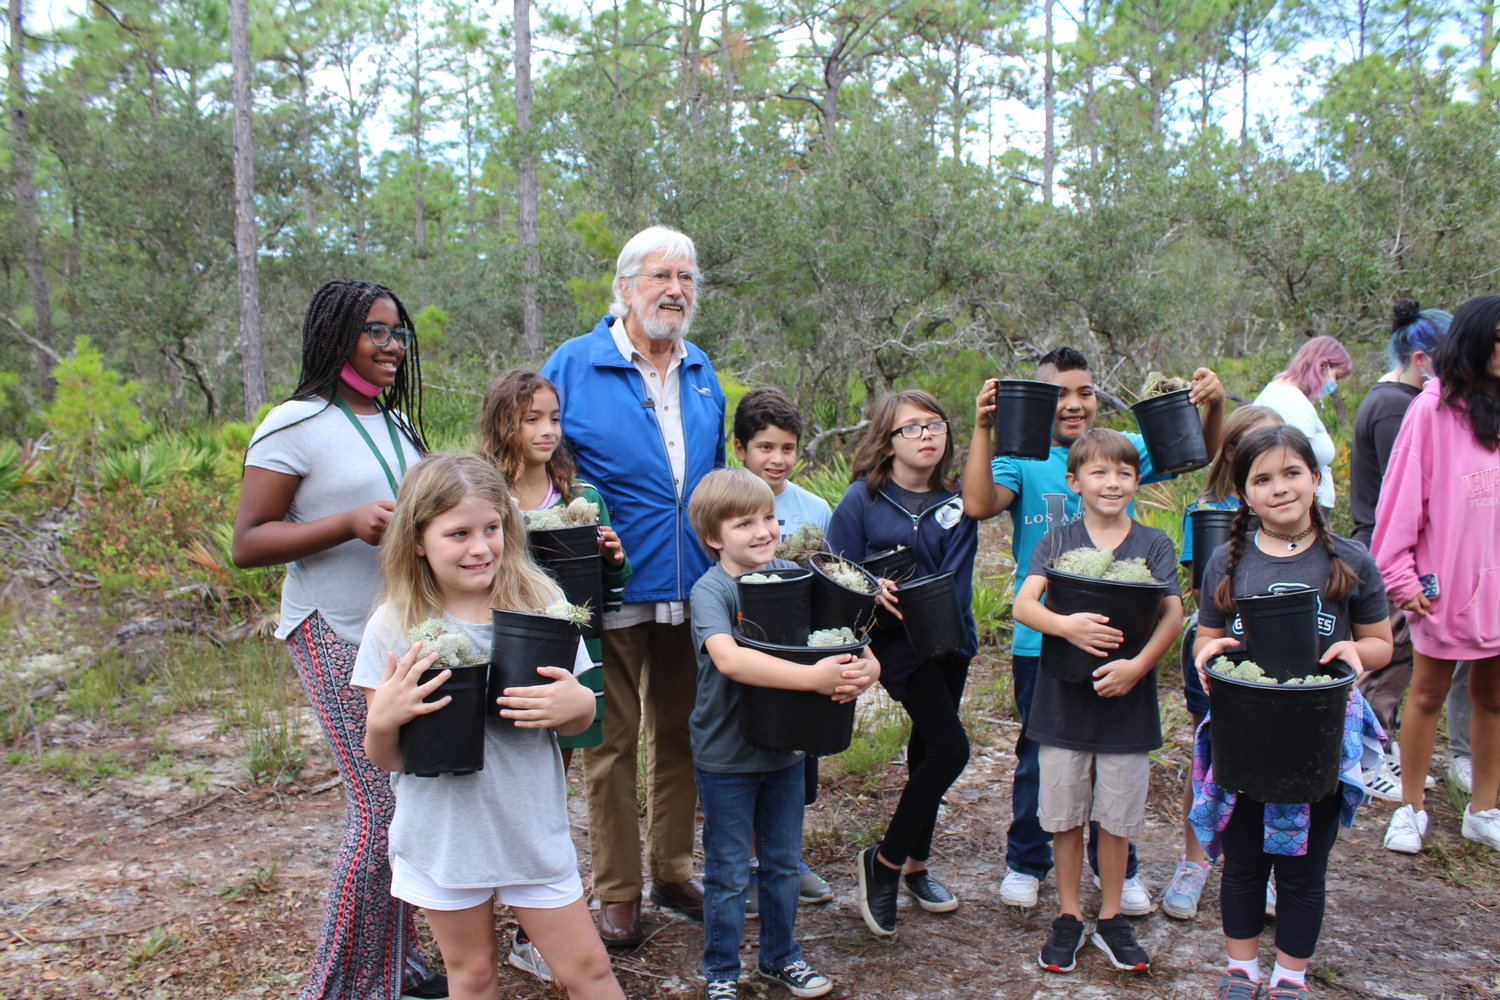 Jean-Michele Cousteau toured the site for the Gulf Coast Eco Center with students during the ground saving event.